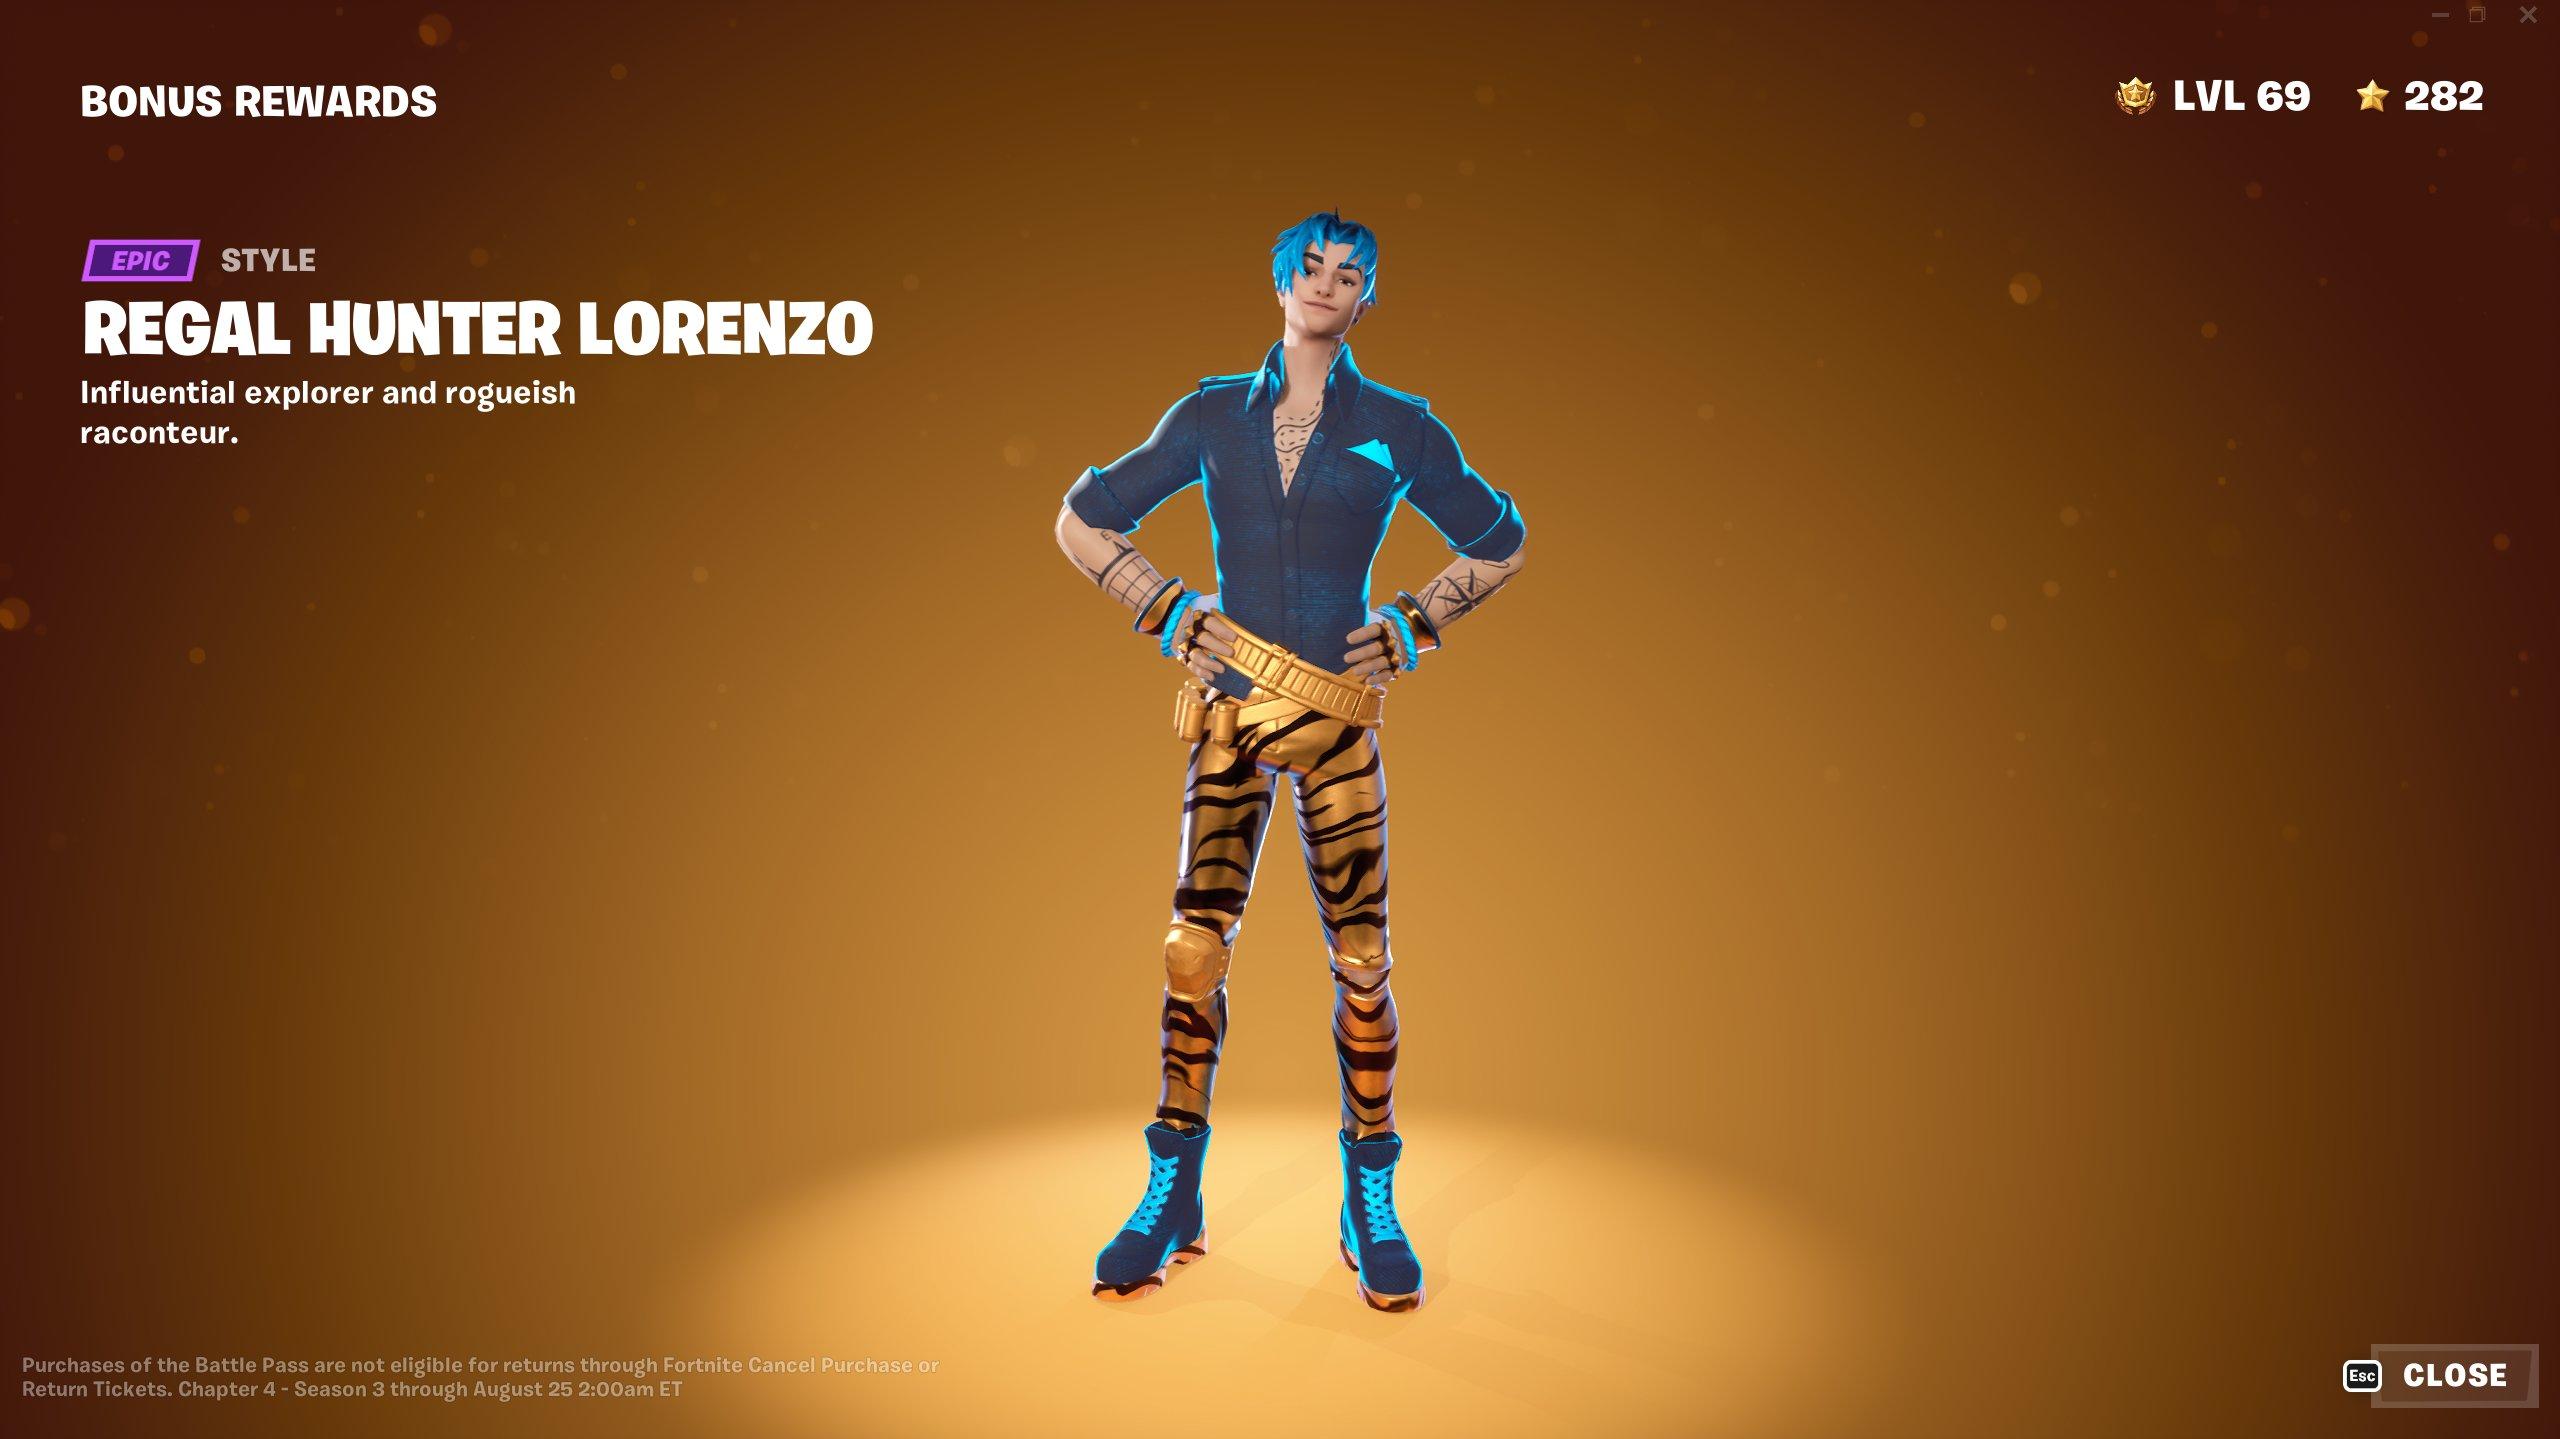 Wasting On X This Lorenzo Style Looks Like He S Just